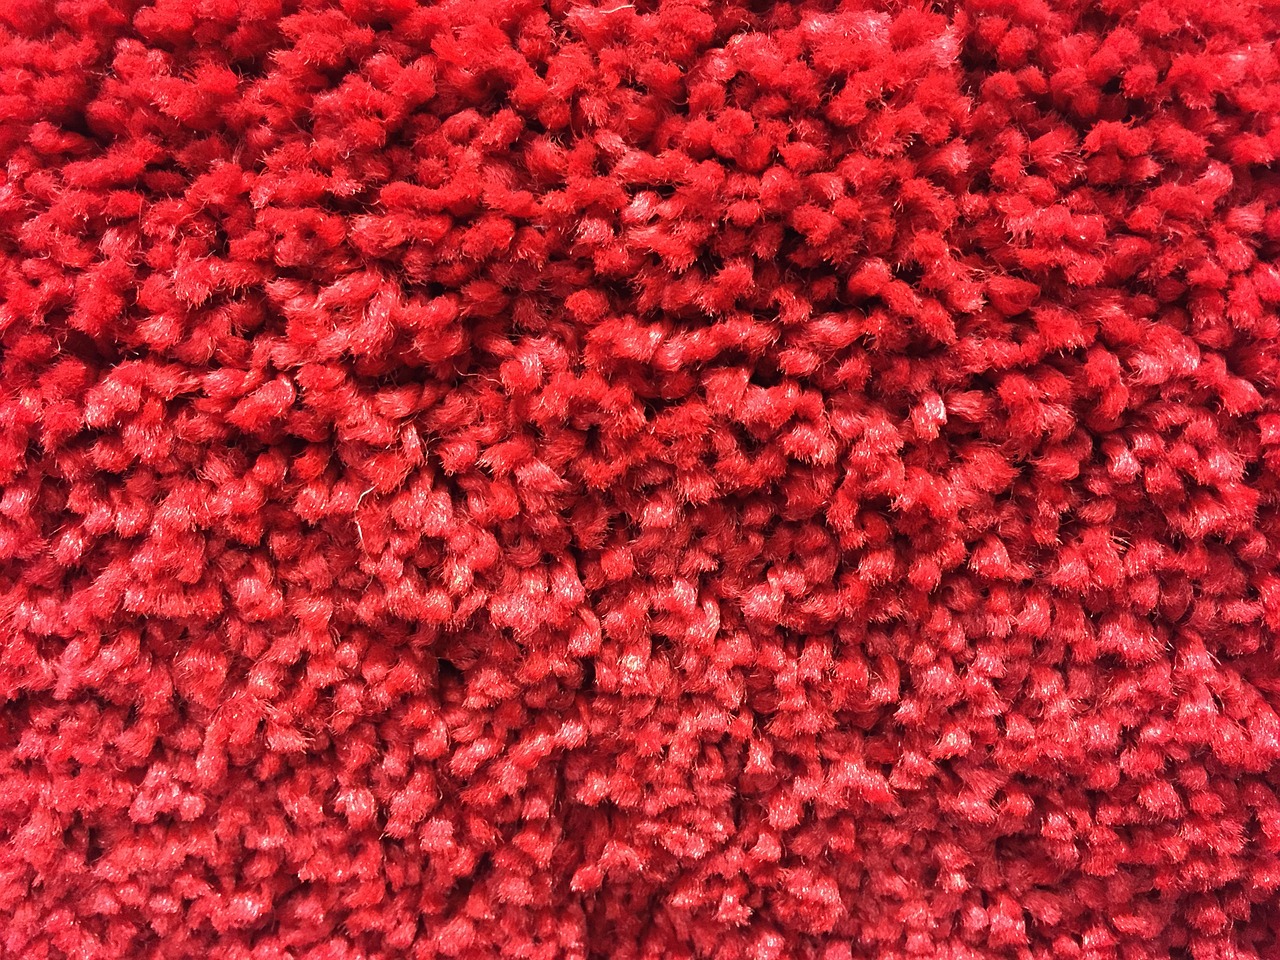 A close-up of the fibres in a carpet